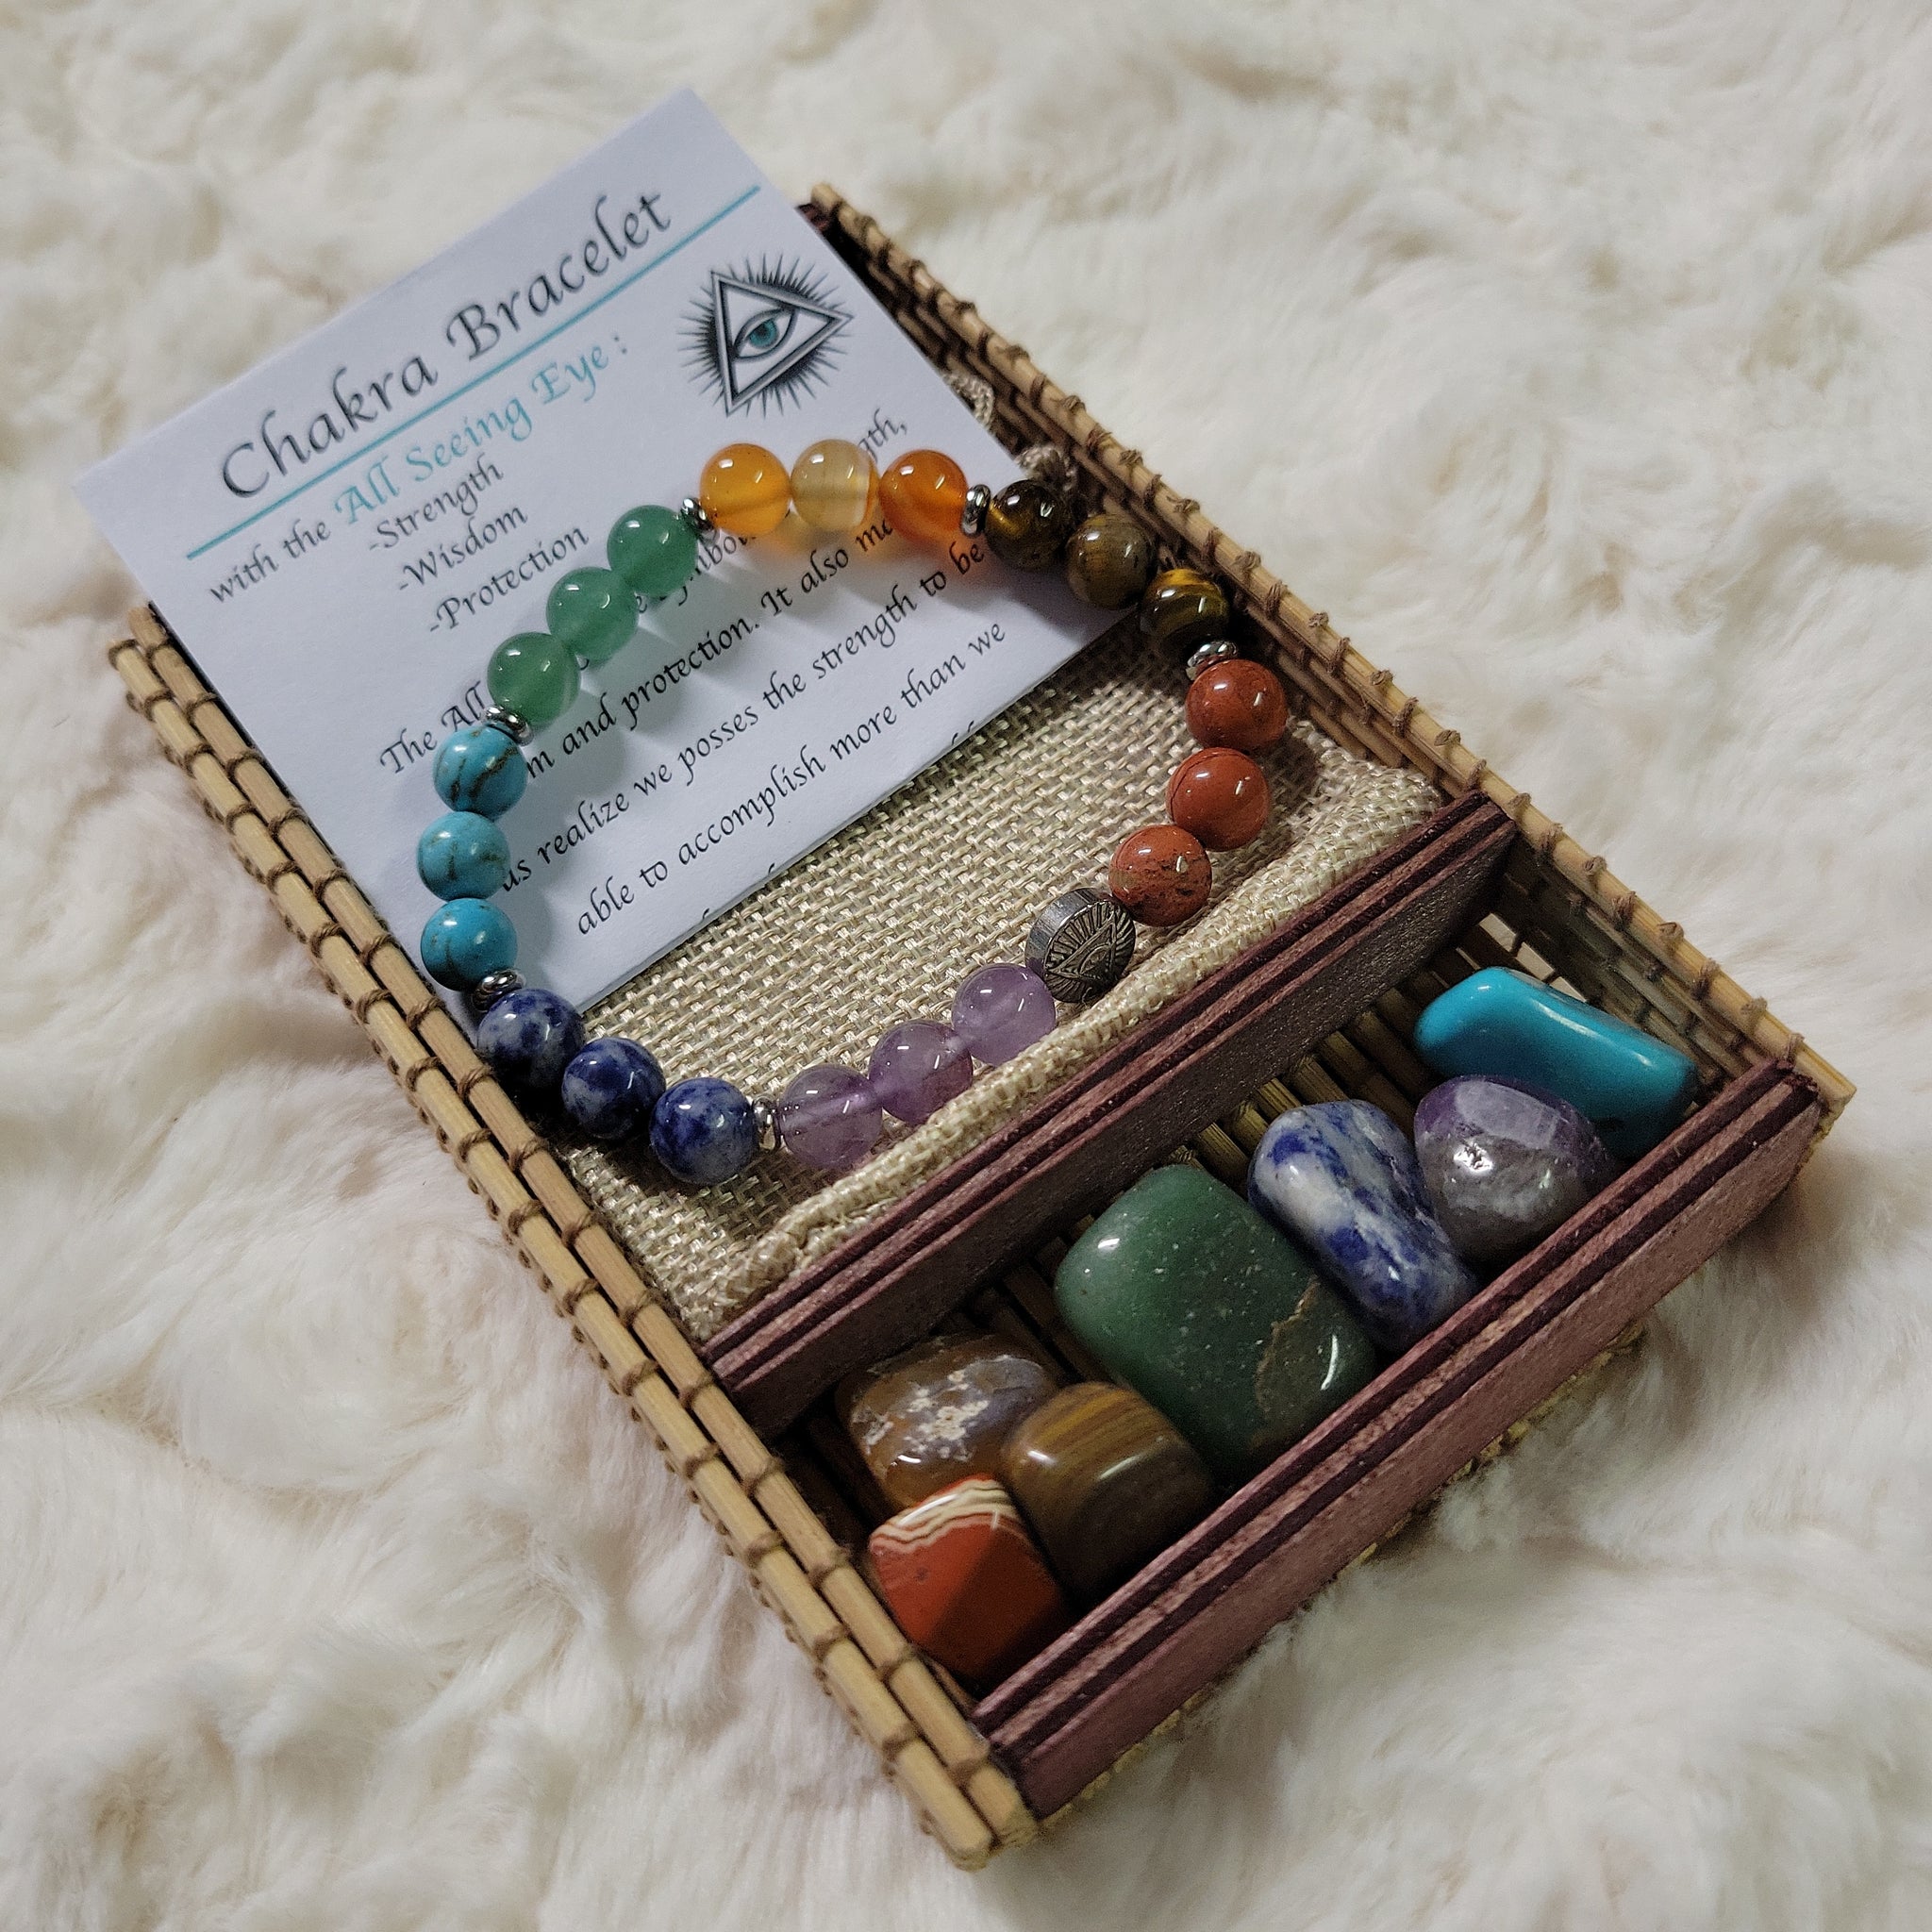 All Seeing Eye Chakra Bracelet with Stones